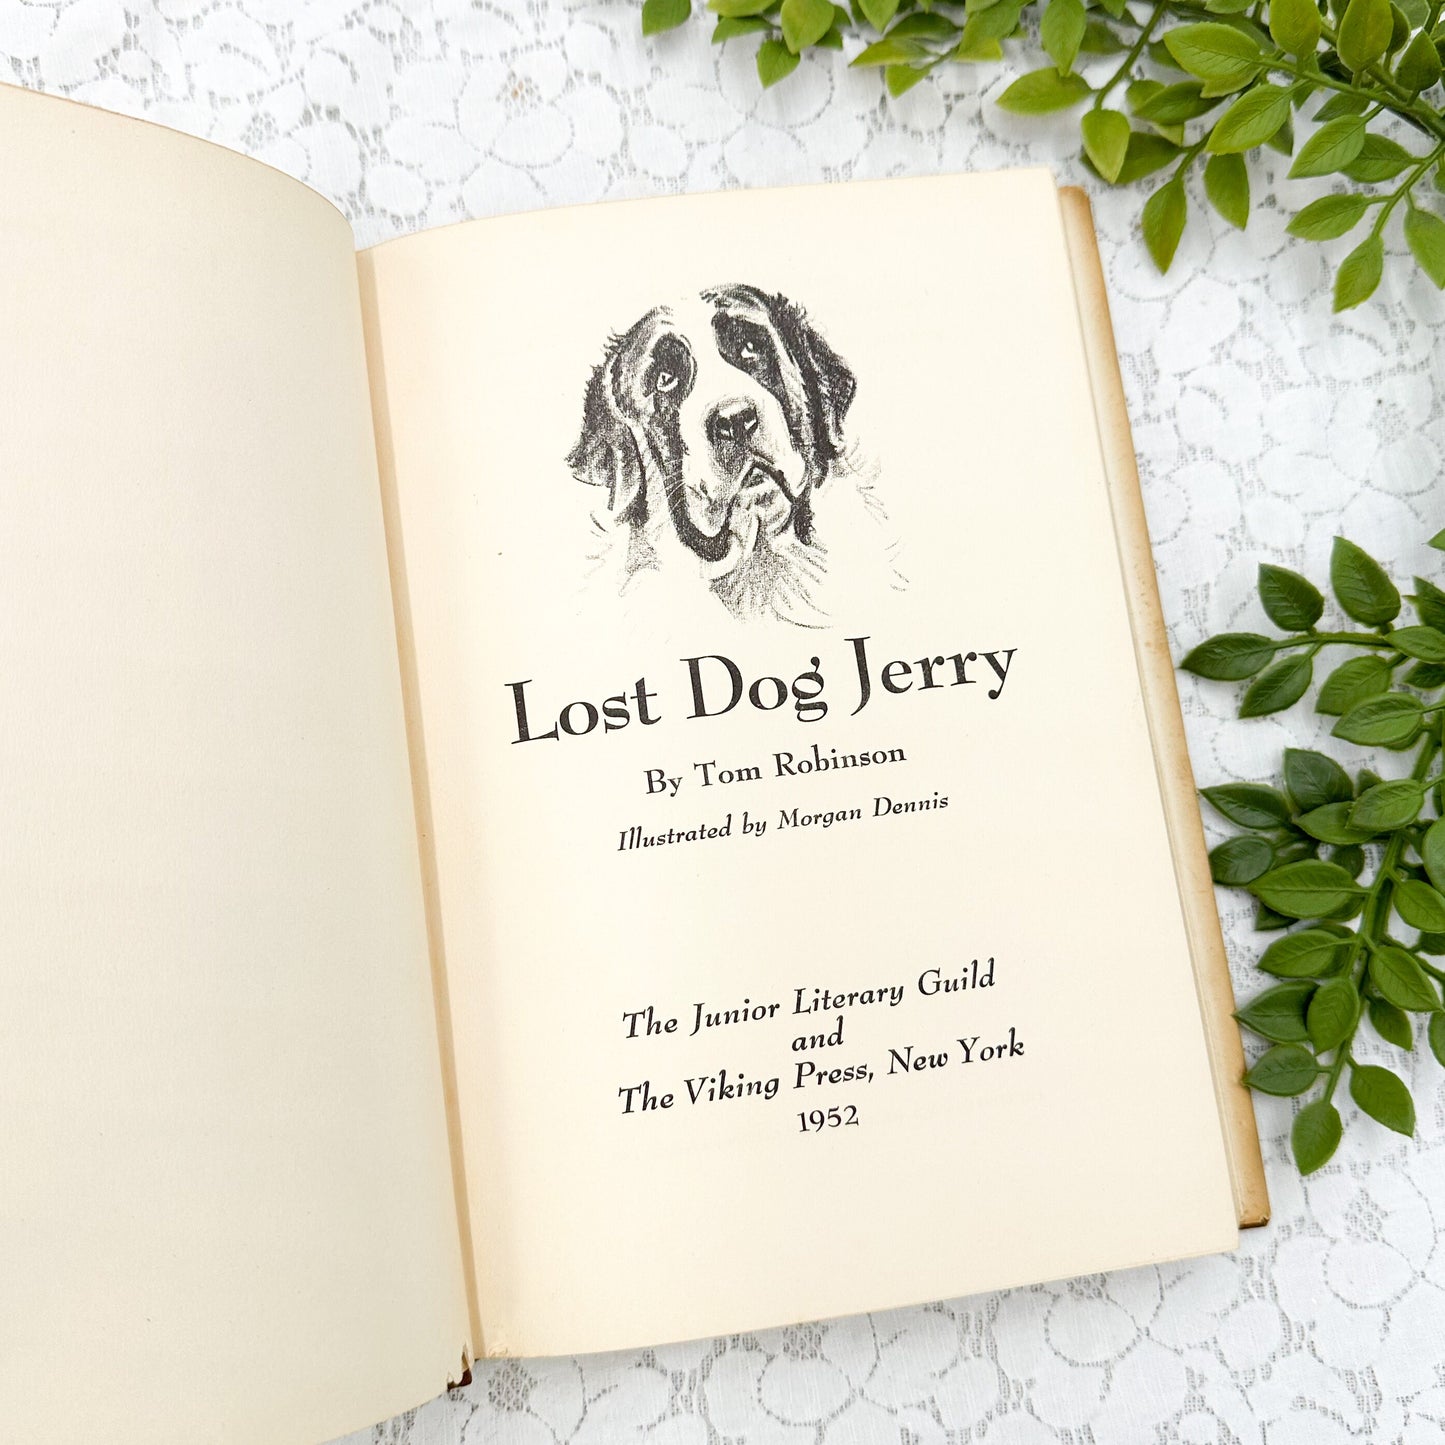 Lost Dog Jerry by Tom Robinson